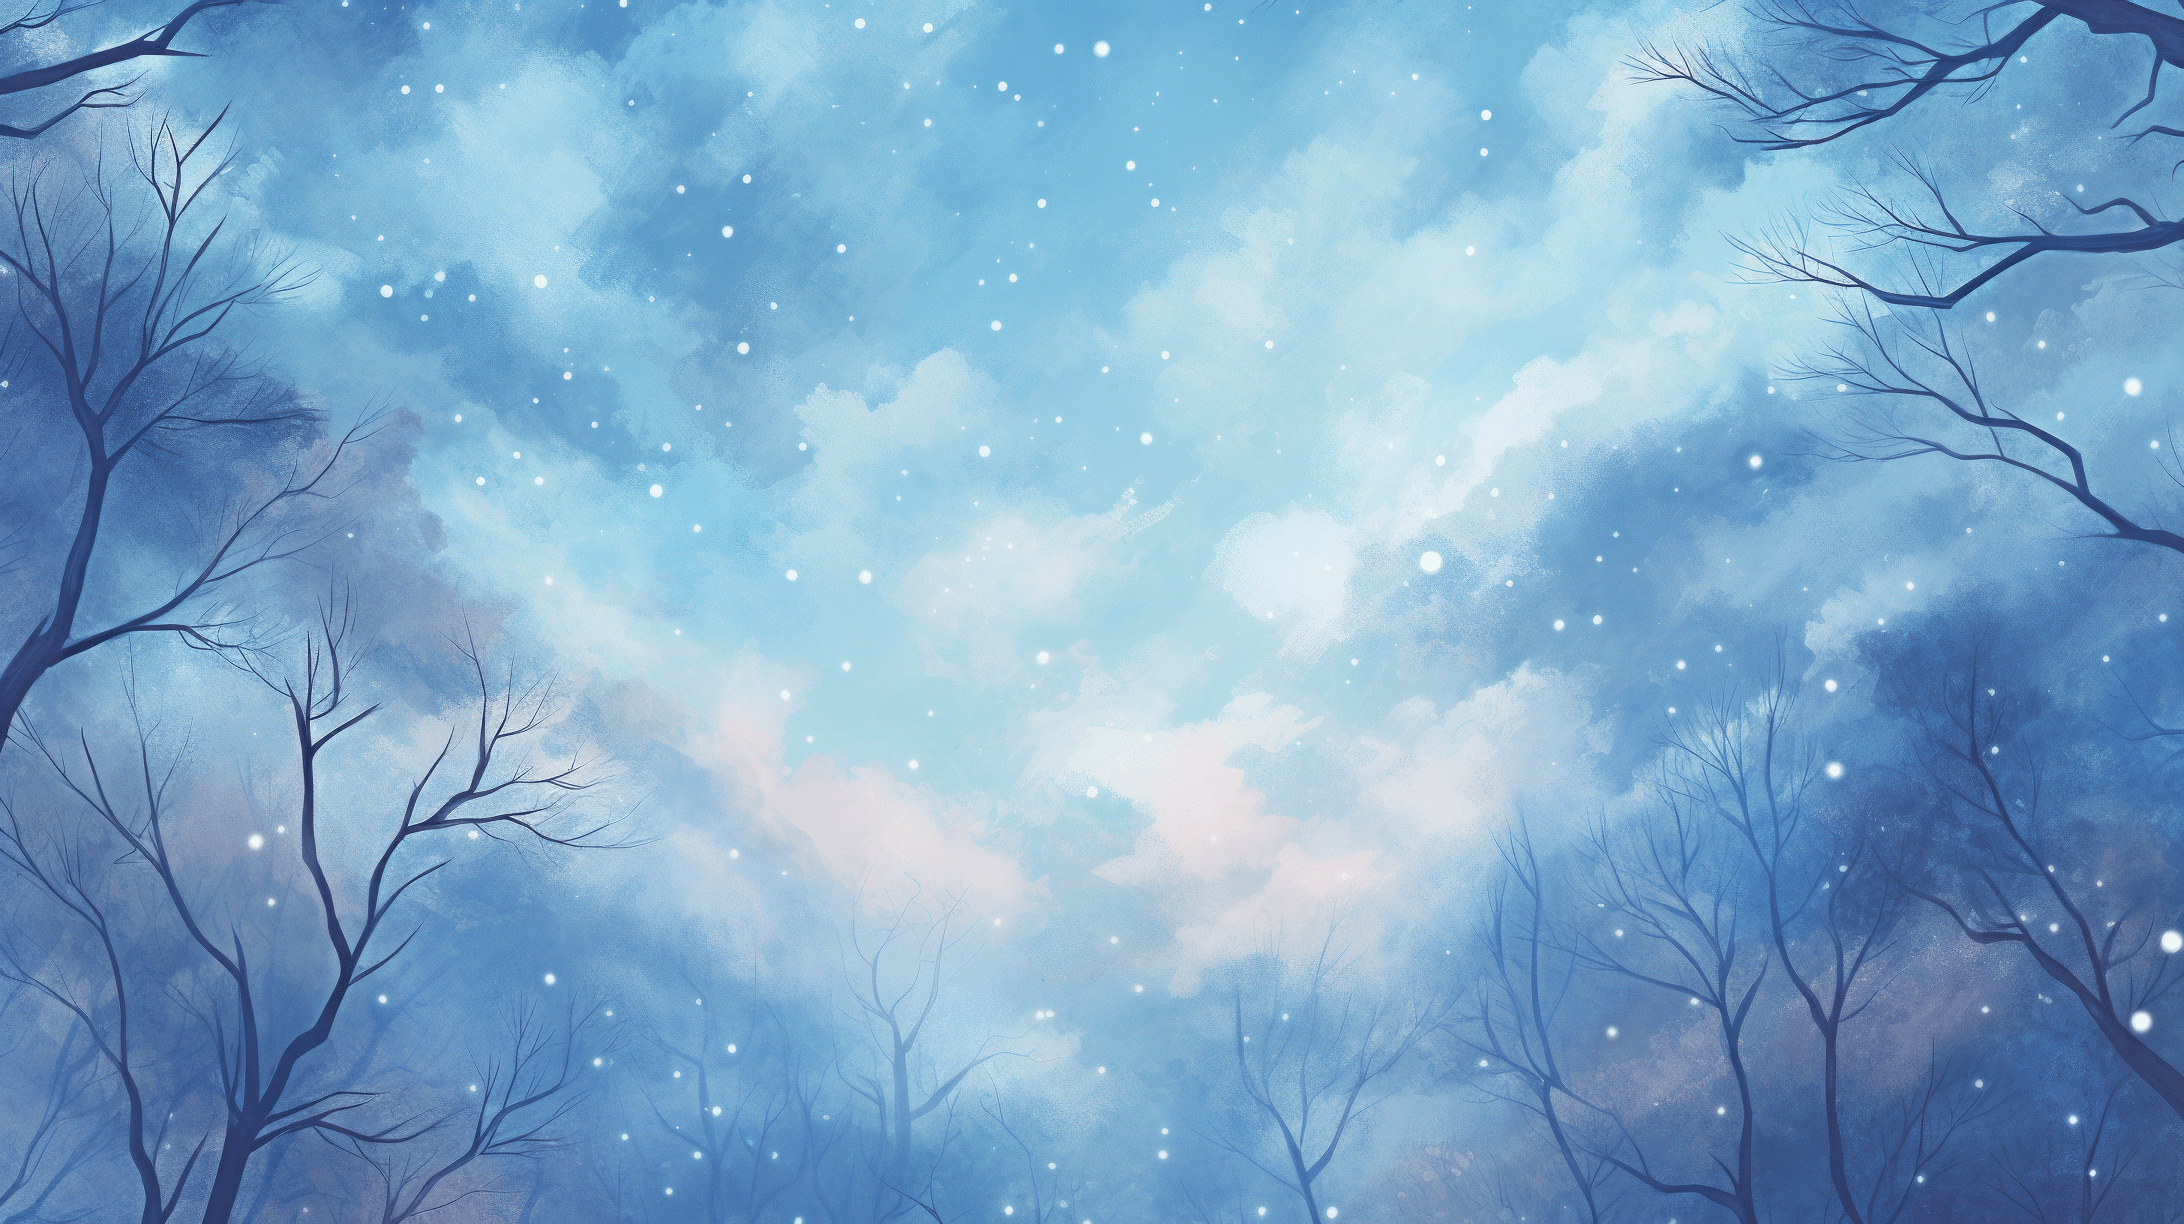 A digital painting of a starry night sky with a forest of bare trees - Blue, forest